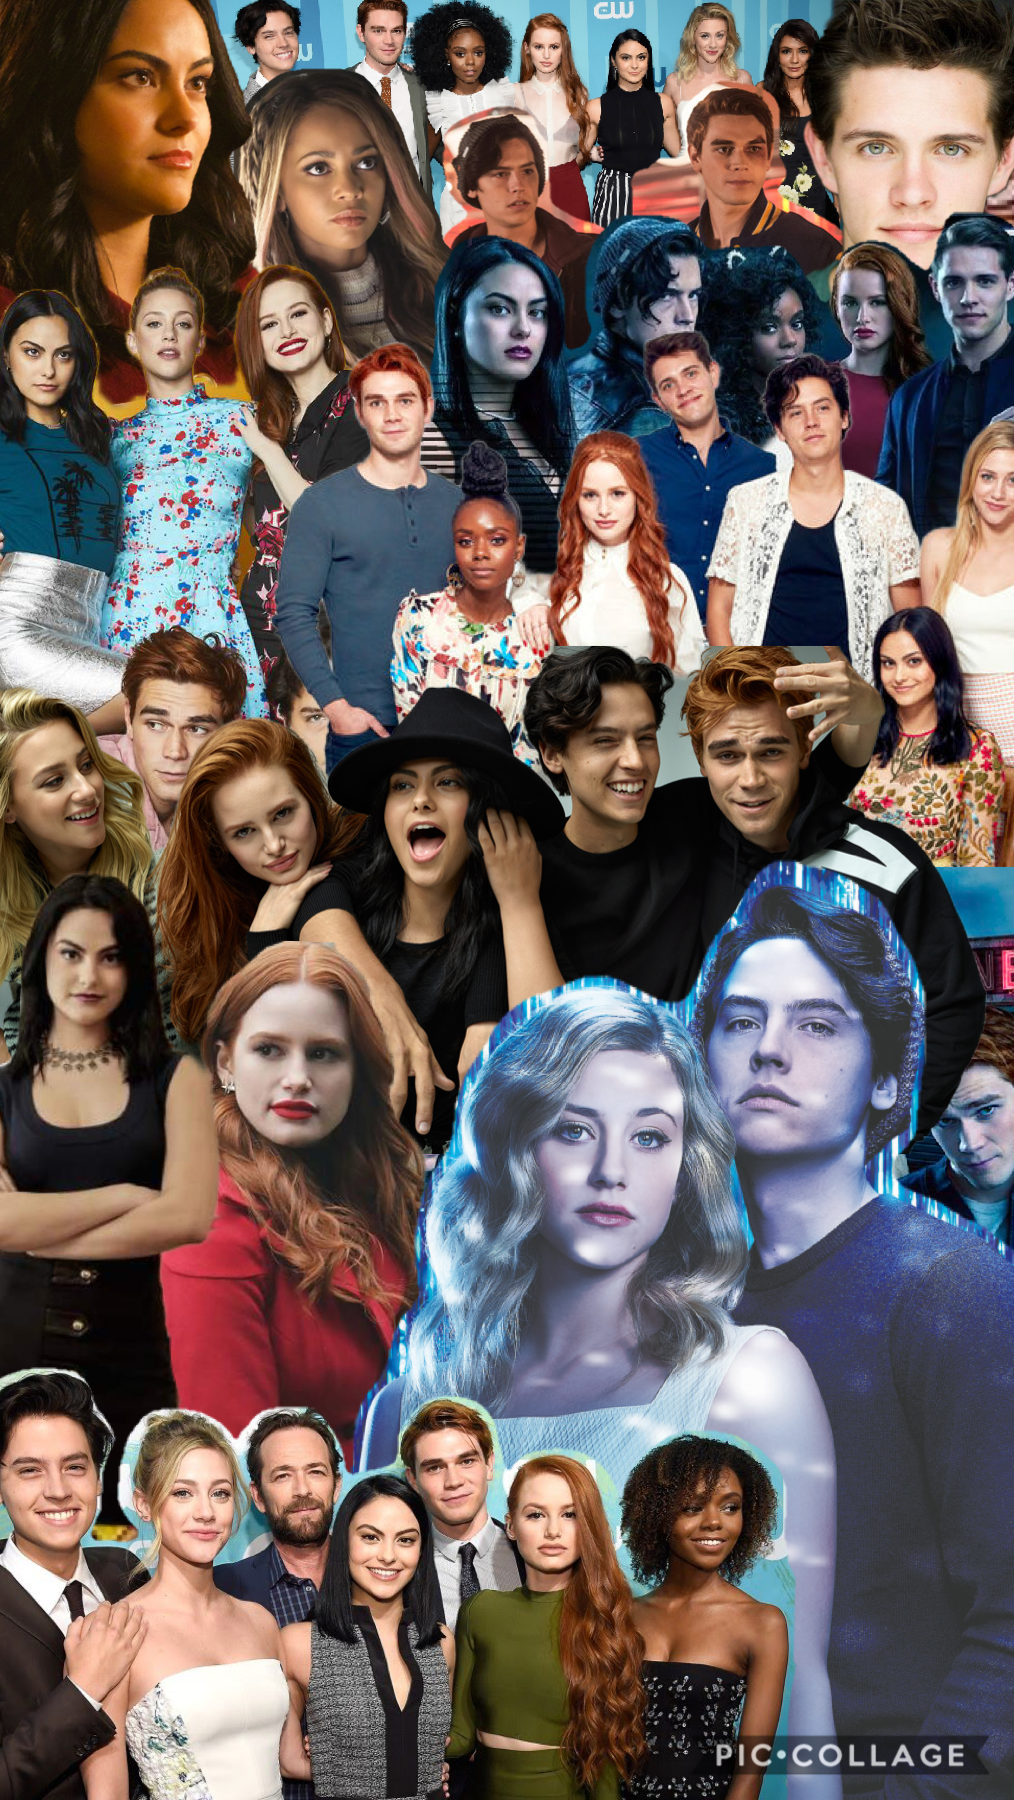 👉🏼!!!Tap!!!👈🏼

A riverdale collage that took 2 days to make (mainly because I was lazy and I had school😂) but it did take a while to position everything in the right spots. Love you all 💓